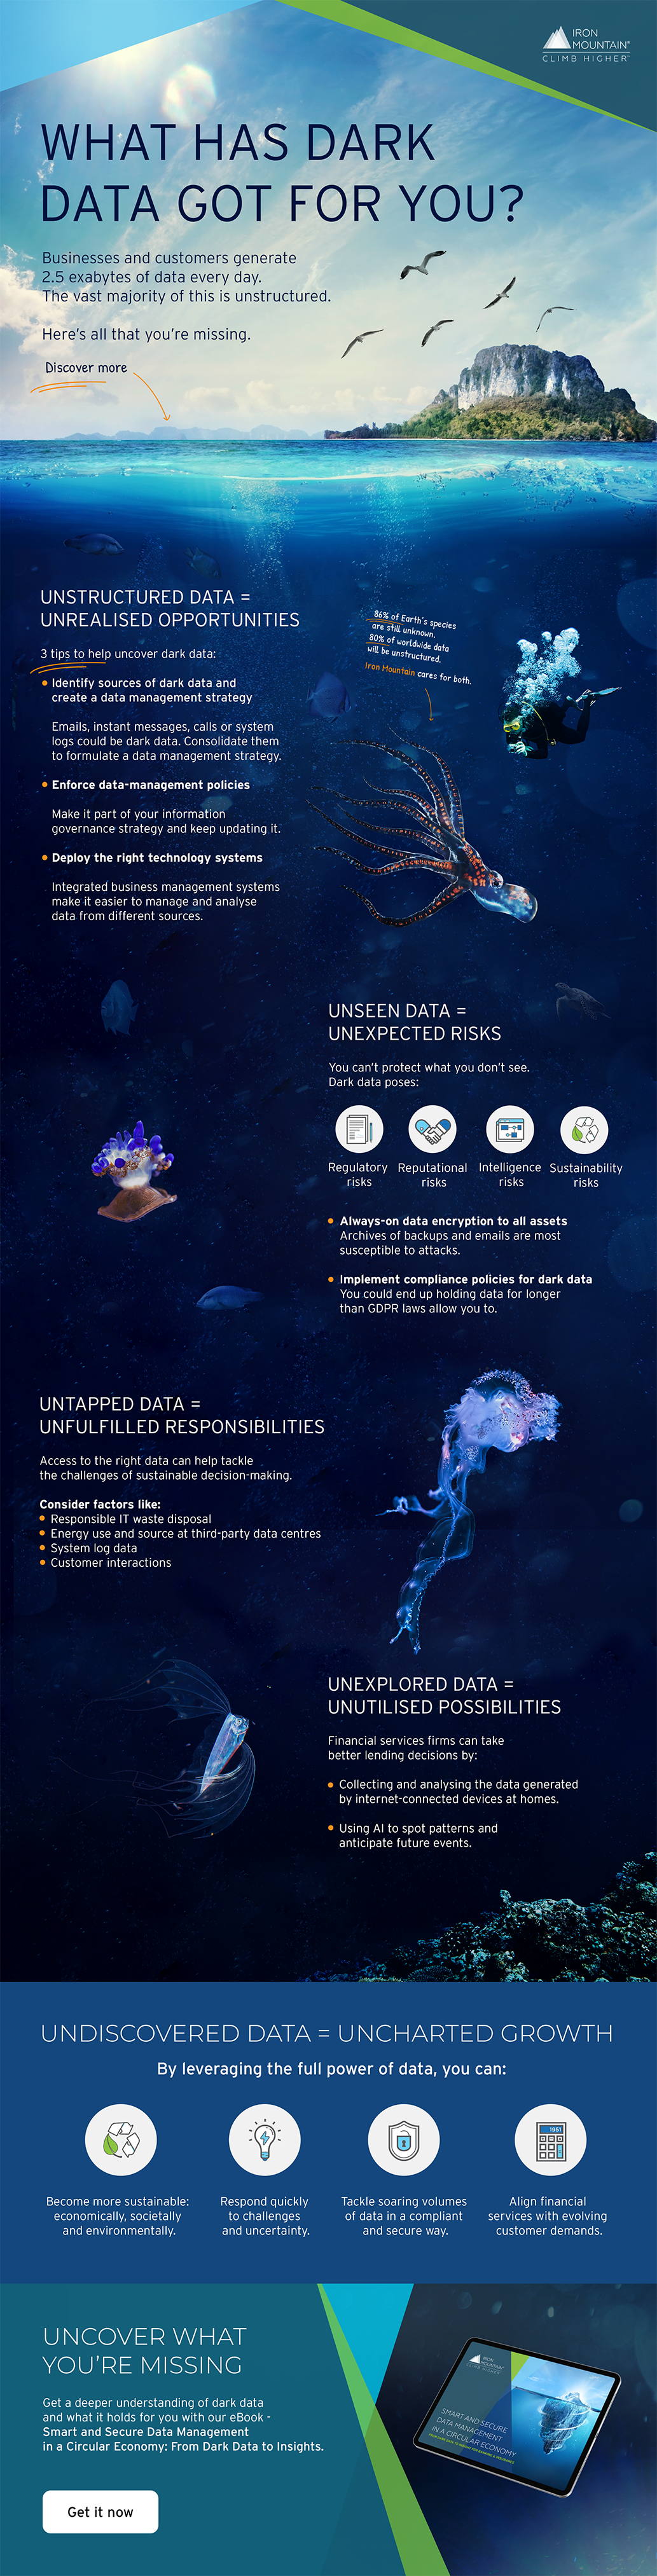 What Has Dark Data Got For You?